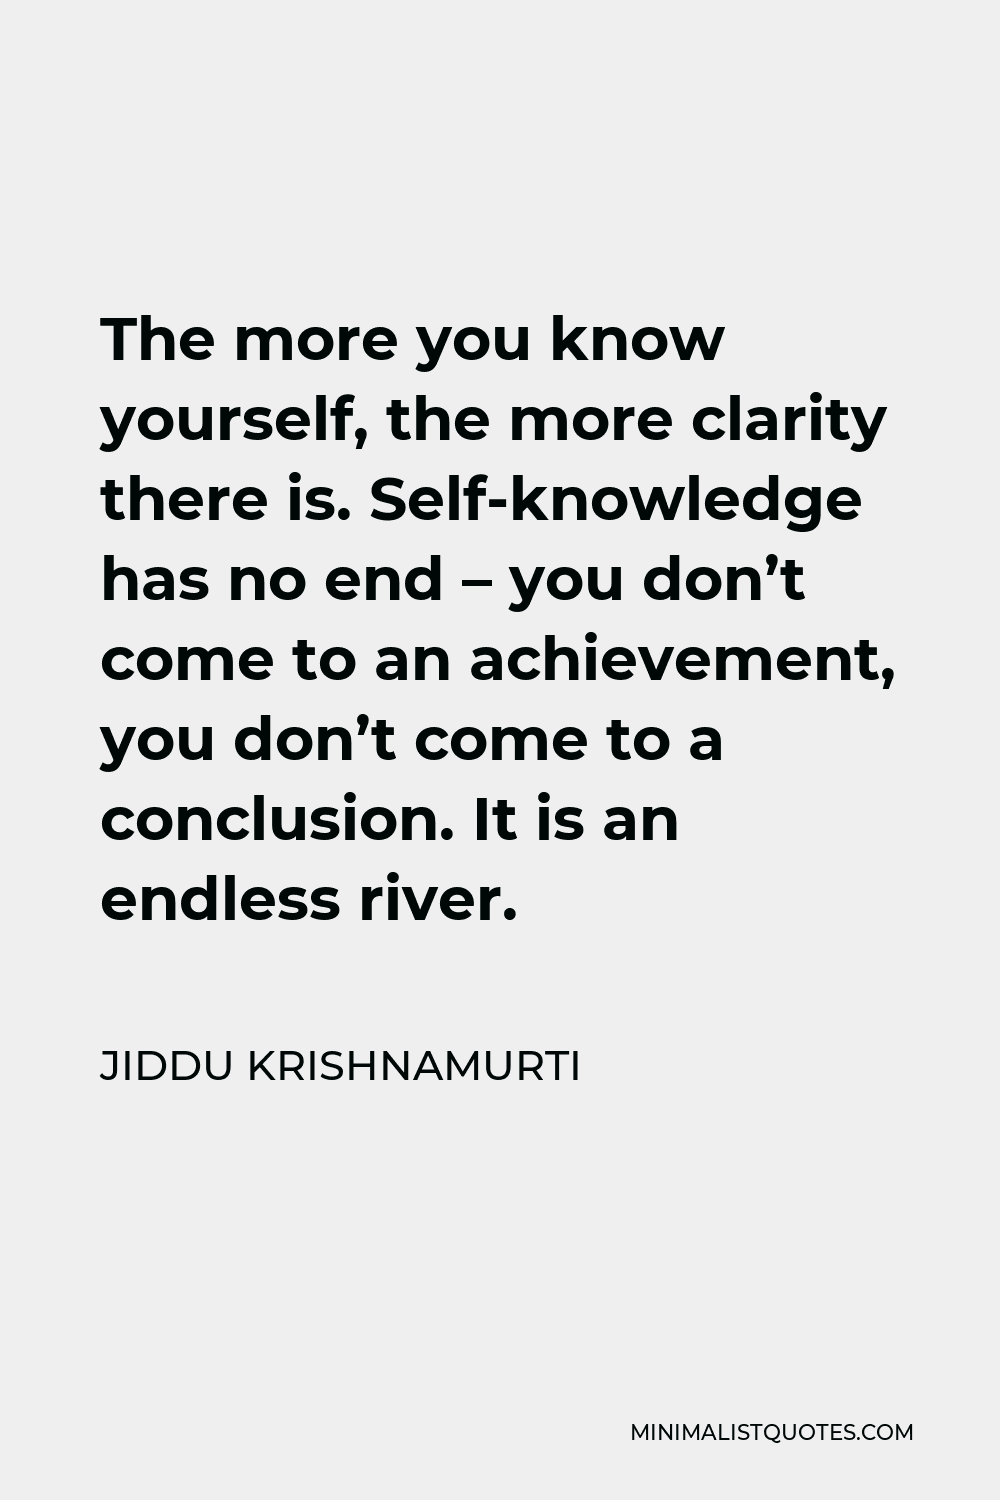 Jiddu Krishnamurti Quote - The more you know yourself, the more clarity there is. Self-knowledge has no end – you don’t come to an achievement, you don’t come to a conclusion. It is an endless river.